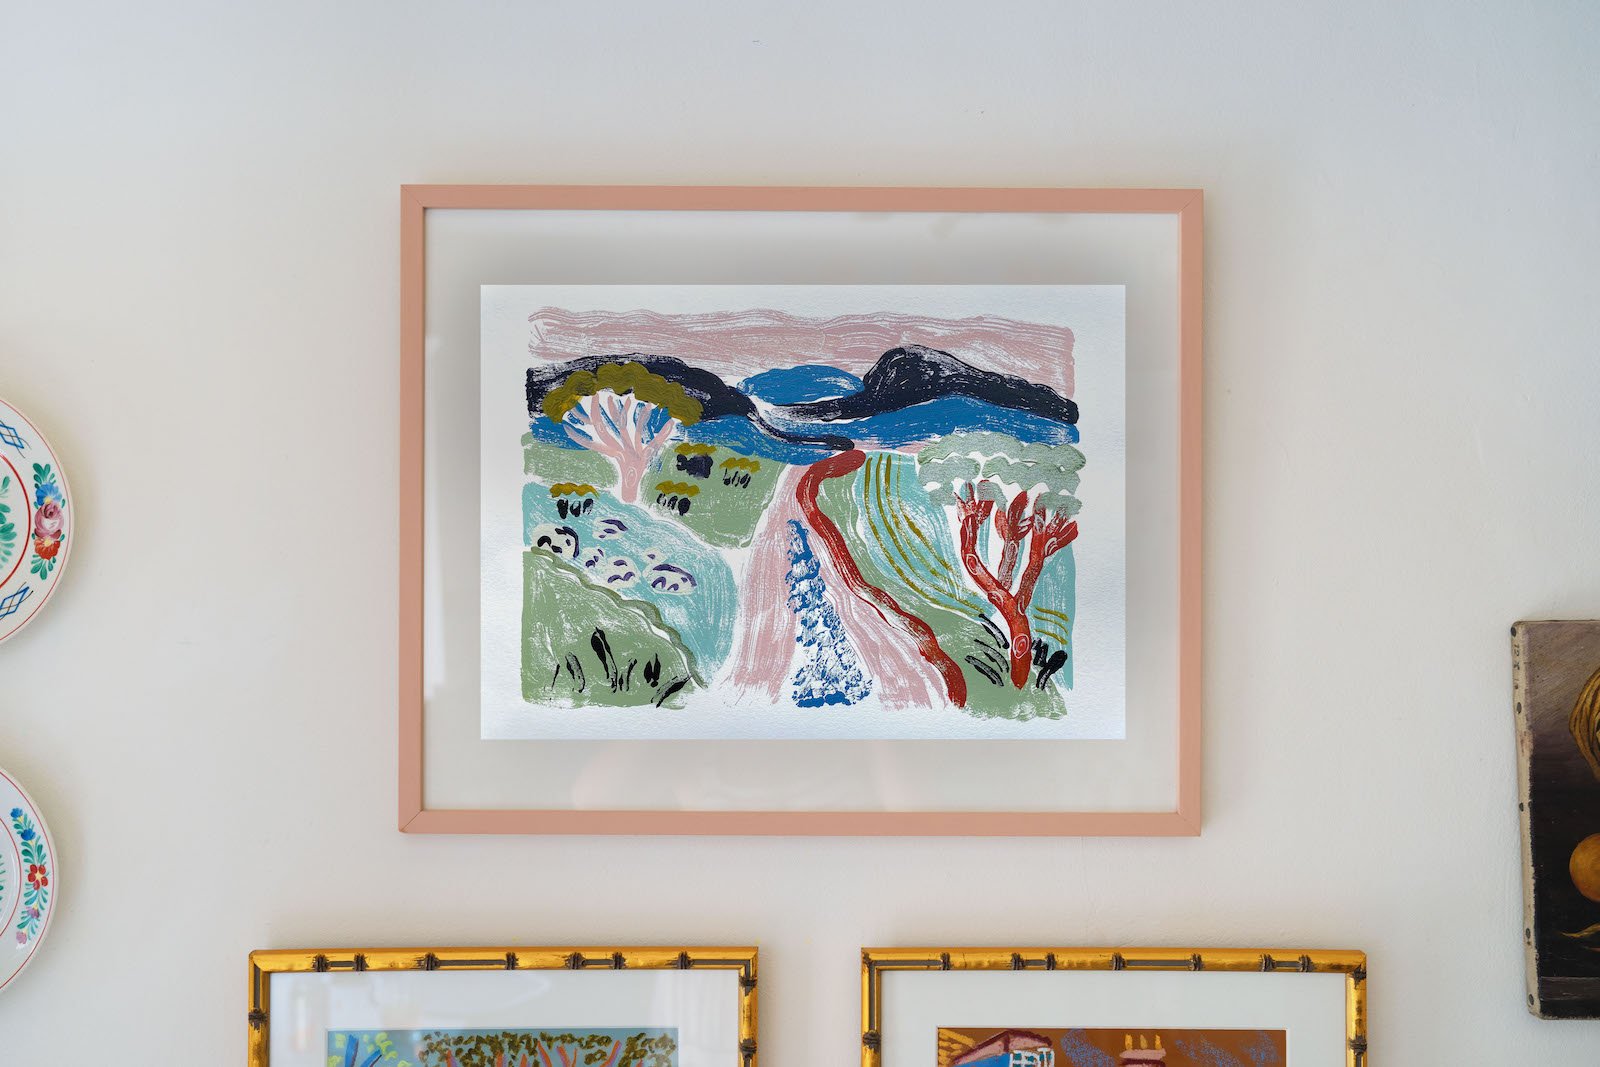 Unframed monoprint by Camilla Perkins, photographed in her studio. Hand-printed artwork depicting leafy scenery. 